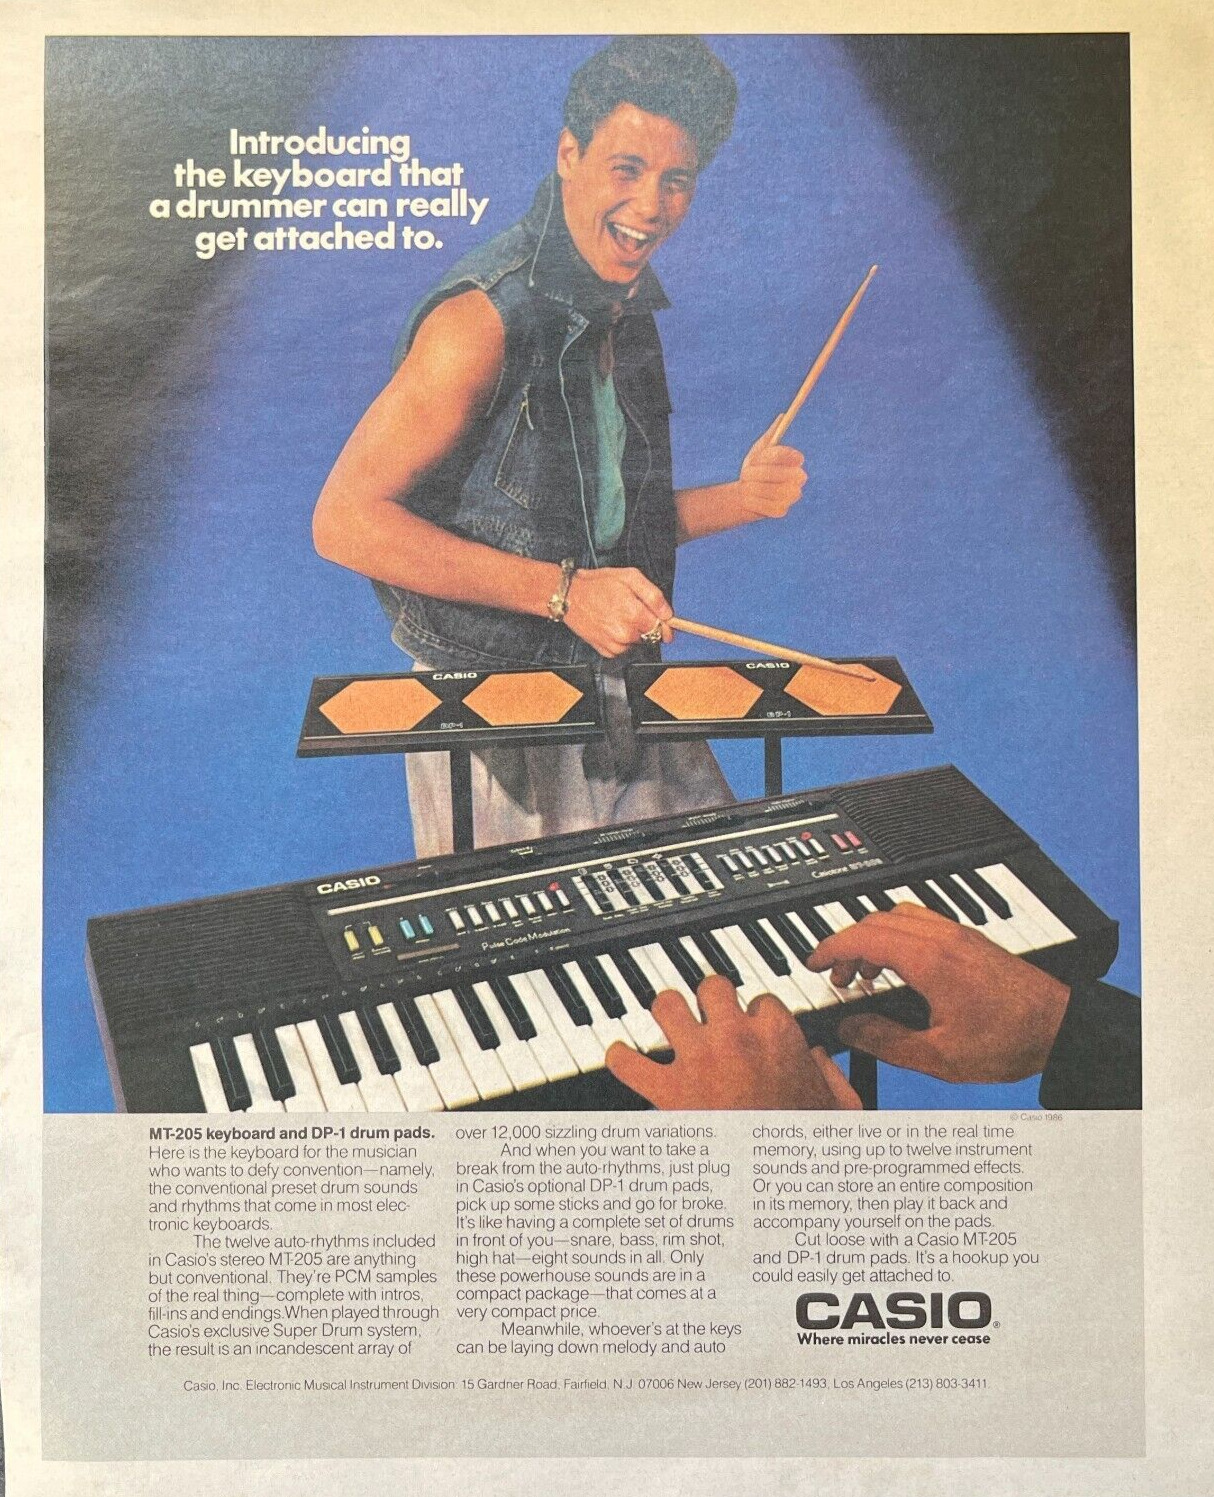 1987 Casio Vintage Print Ad MT-205 Keyboard A Drummer Can Get Attached To